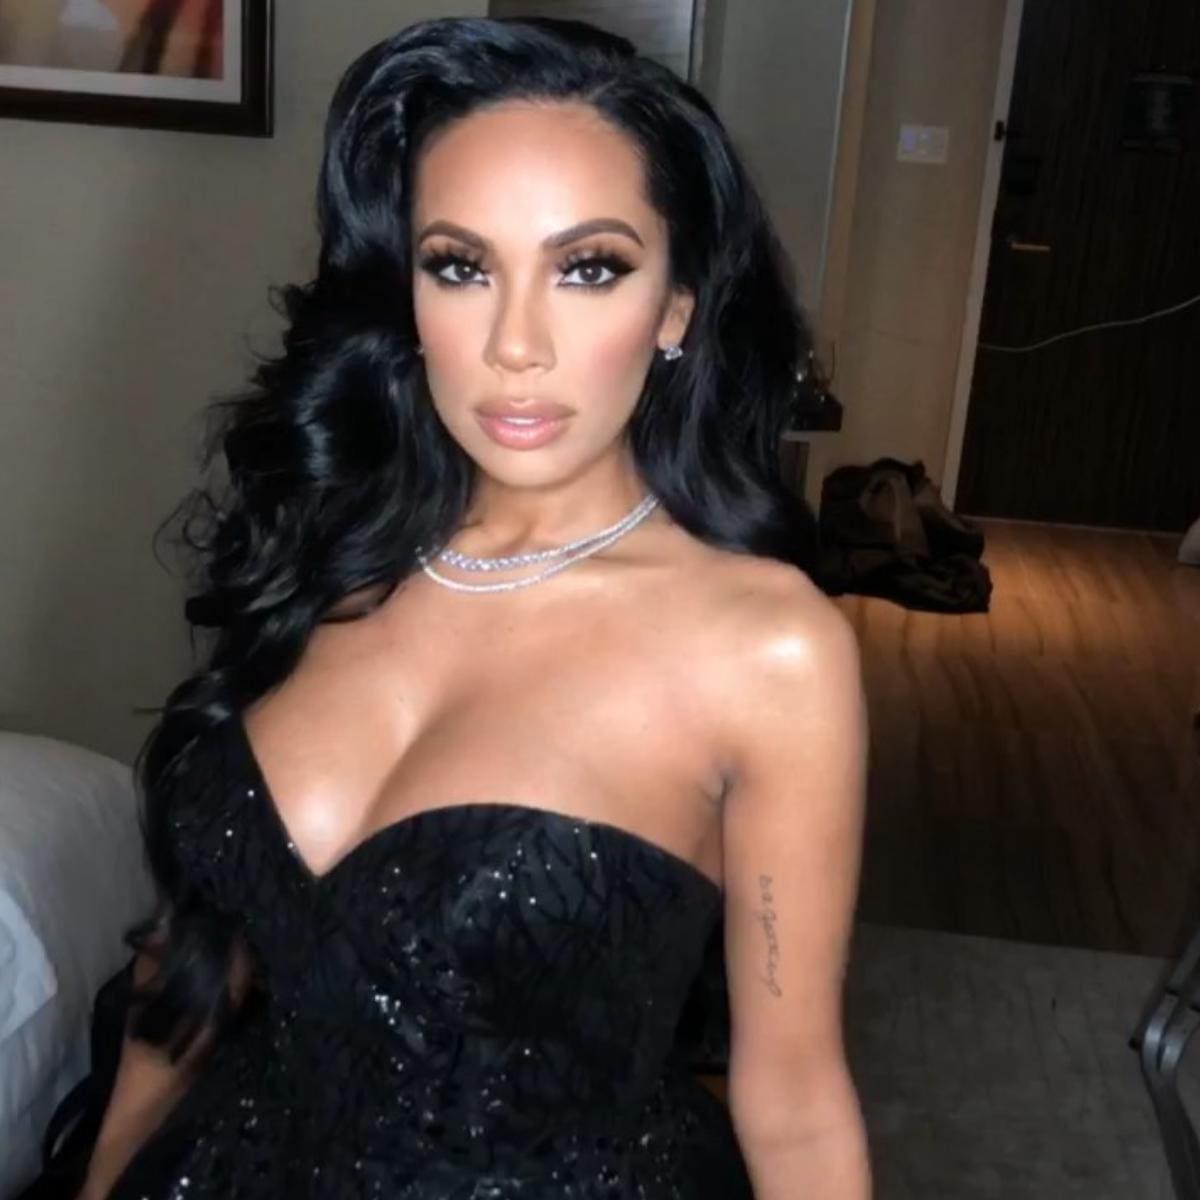 Erica Mena Has A Surprise For Fans Today At 9 P.M. - Catch Her Live On Instagram